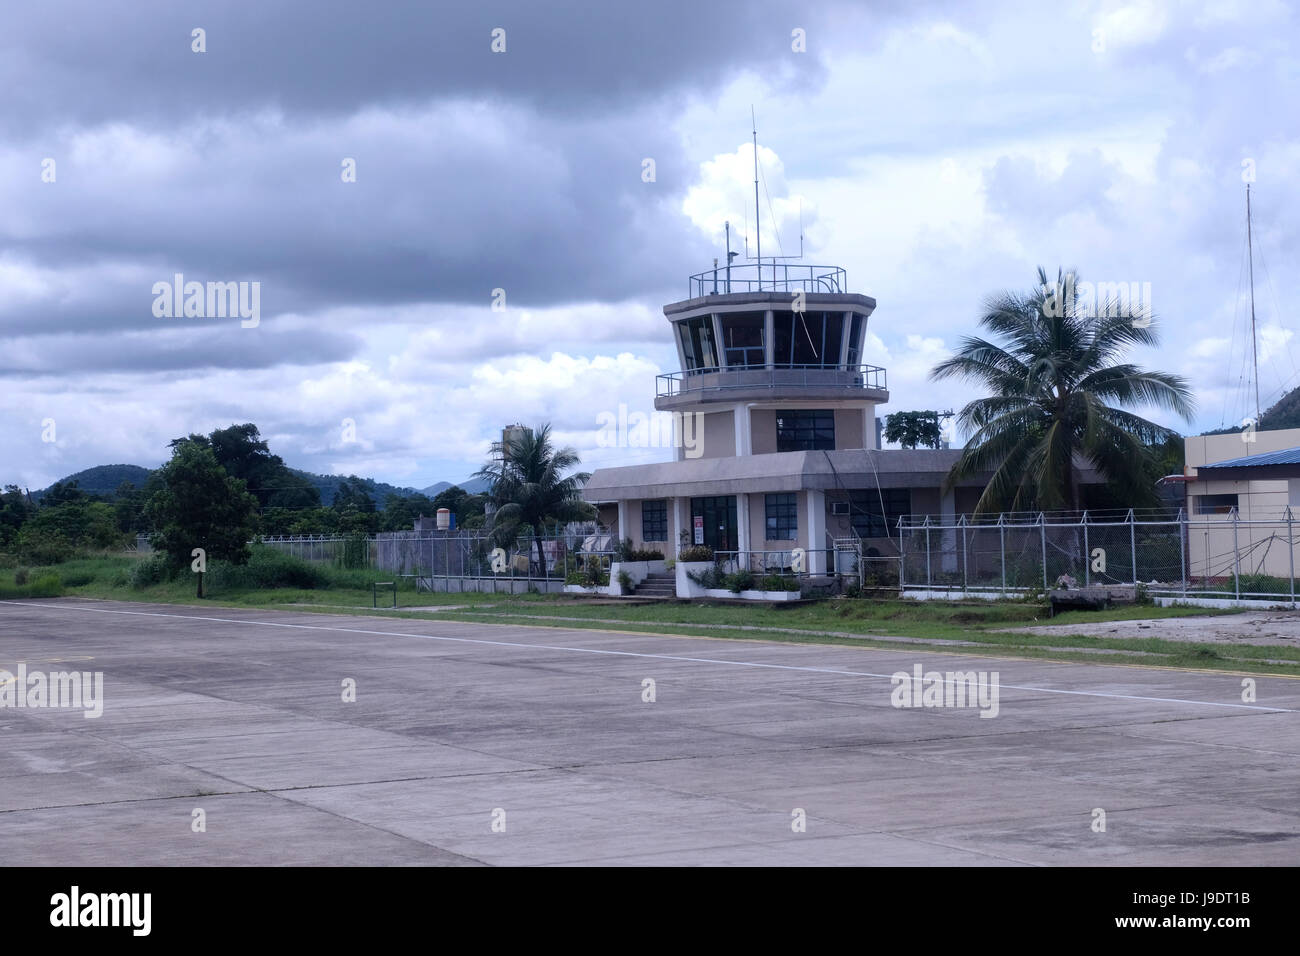 View of the air traffic control tower and small airport named Francisco B. Reyes in the town of Coron in the island of Busuanga in the Calamian Islands in northern Palawan of the Philippines Stock Photo